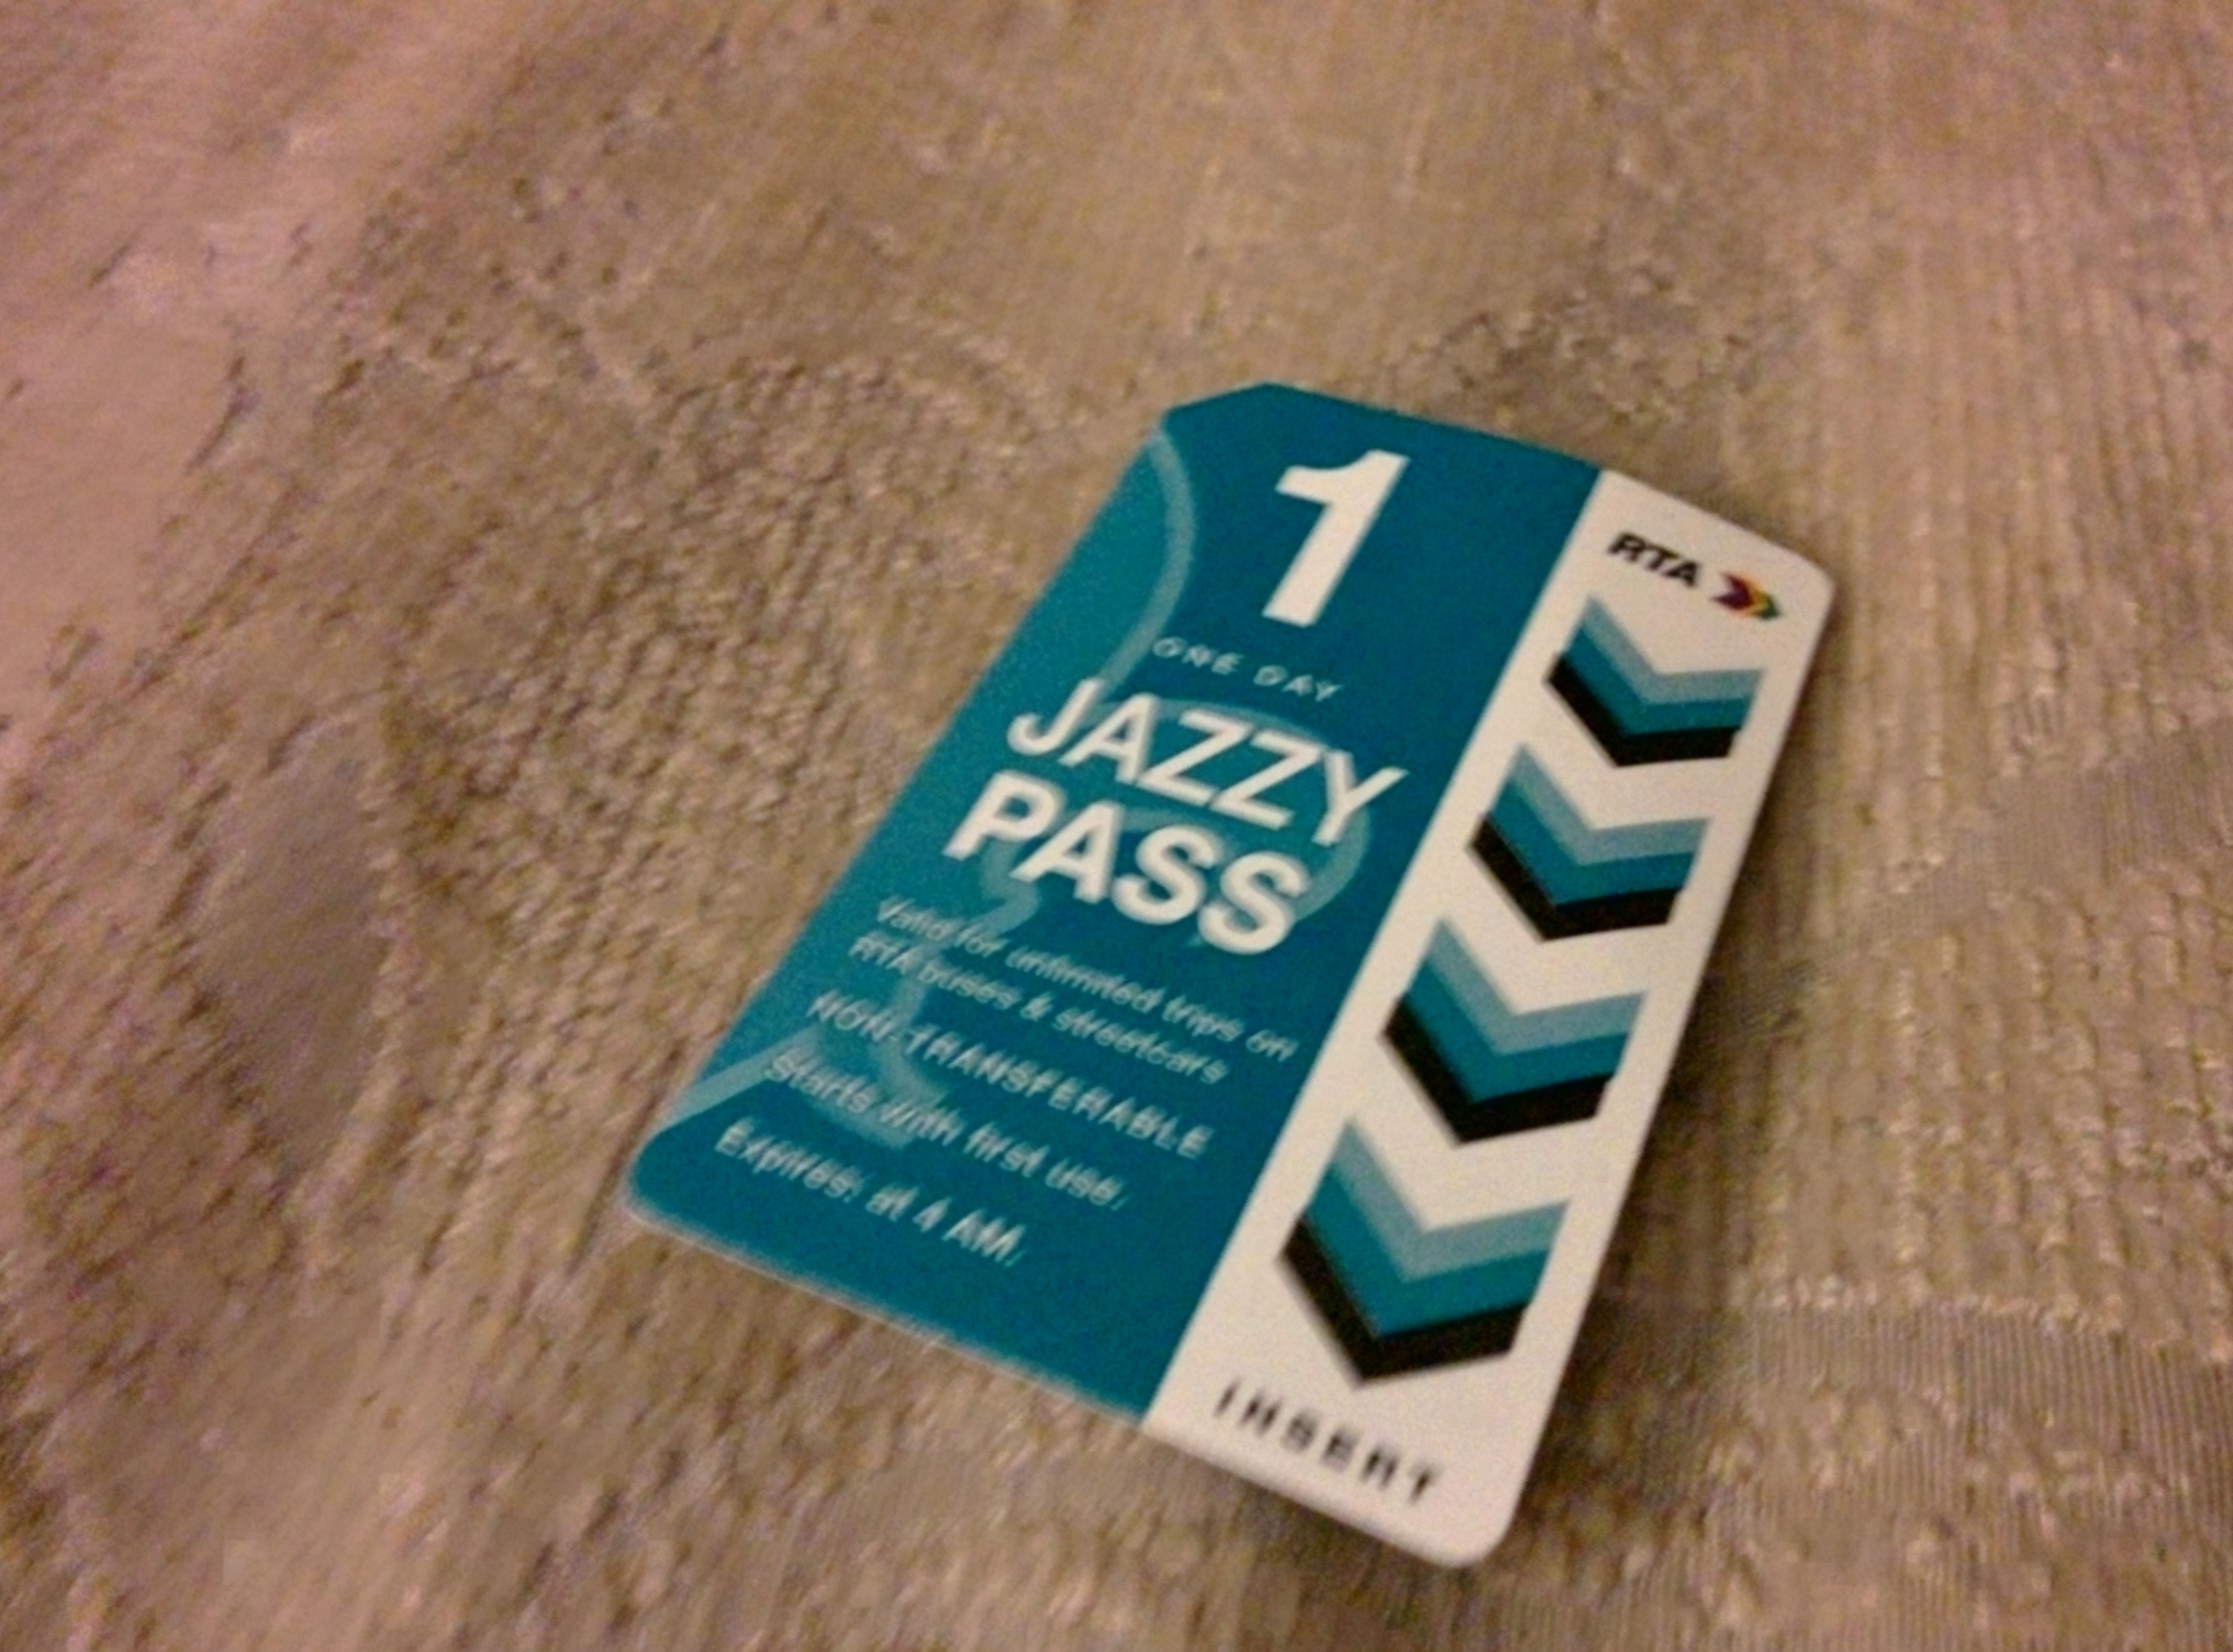 New Orleans Jazzy Pass